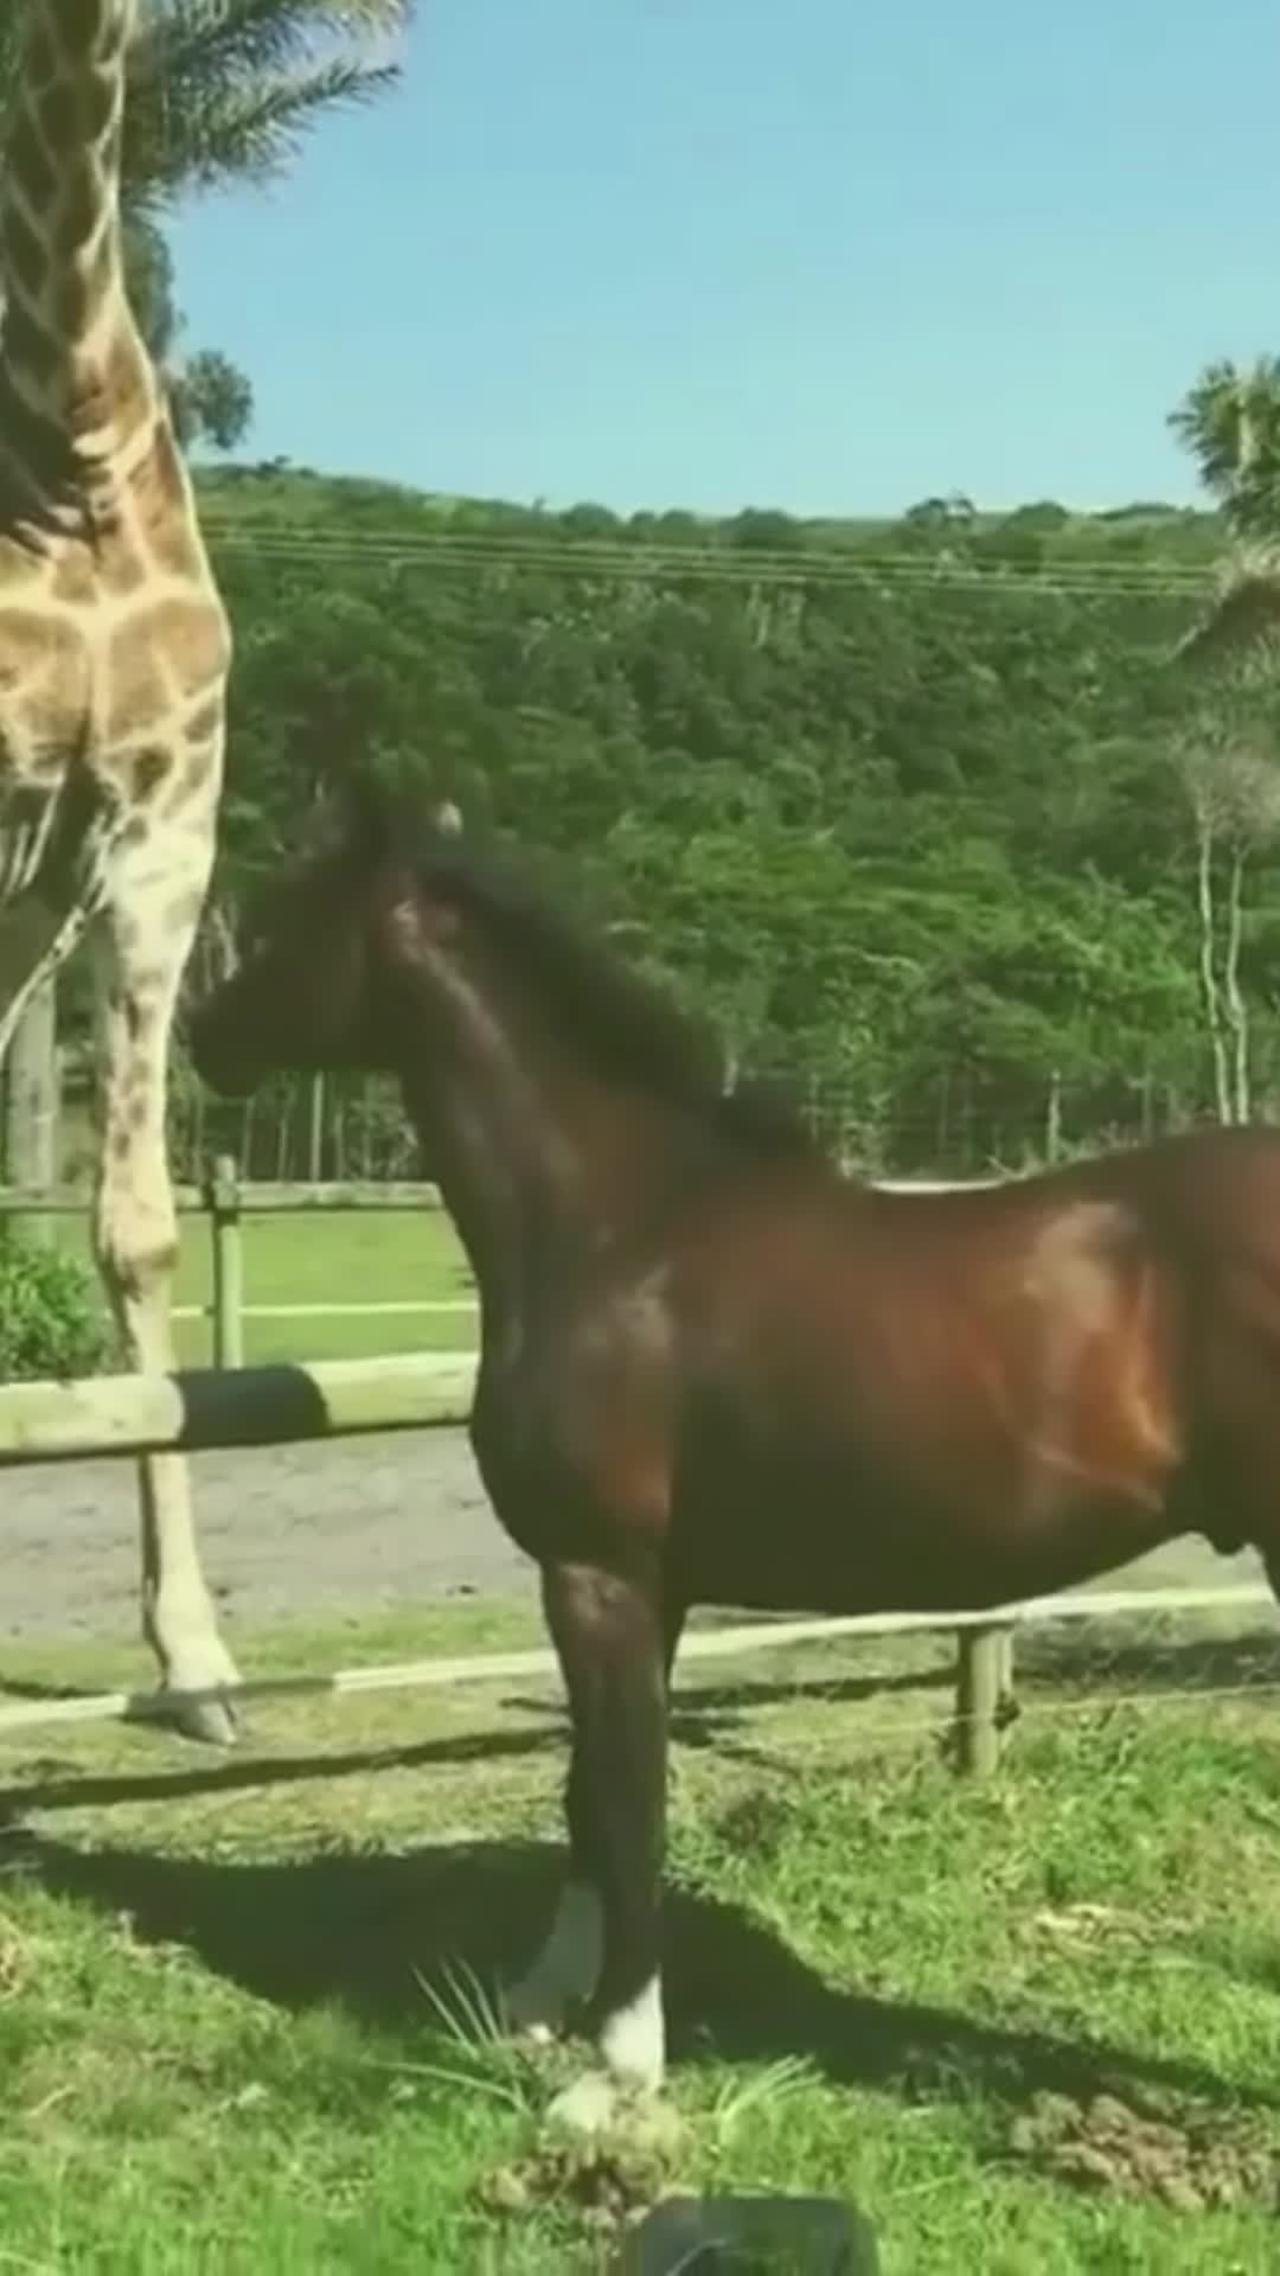 #animal actions #brown horse 🐴and giraffe 🦒 amazing actions# |#shorts|#horses